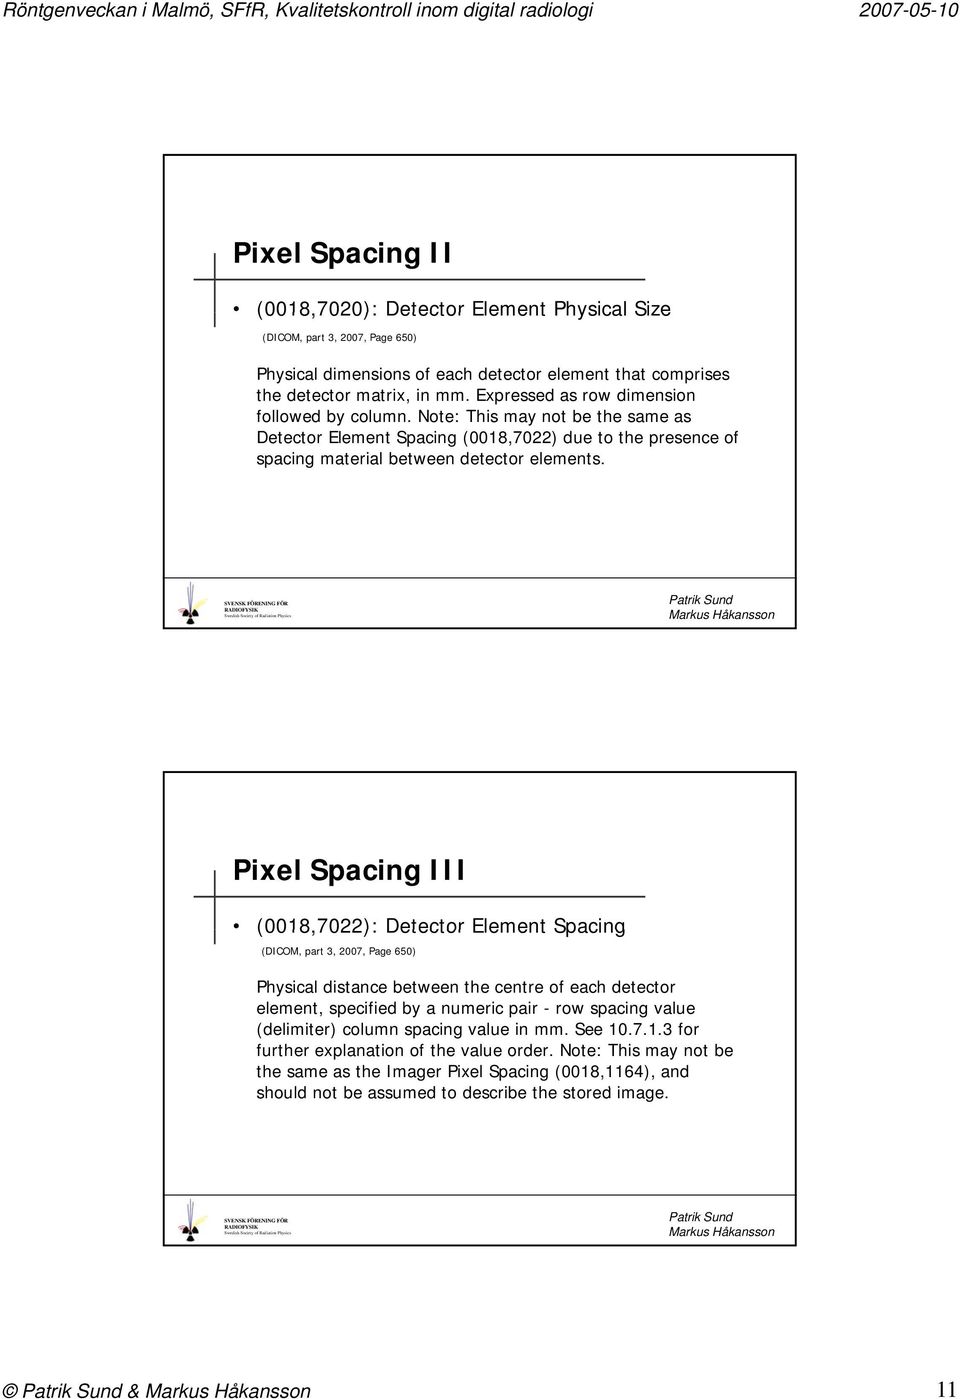 Pixel Spacing III (0018,7022): Detector Element Spacing (DICOM, part 3, 2007, Page 650) Physical distance between the centre of each detector element, specified by a numeric pair - row spacing value